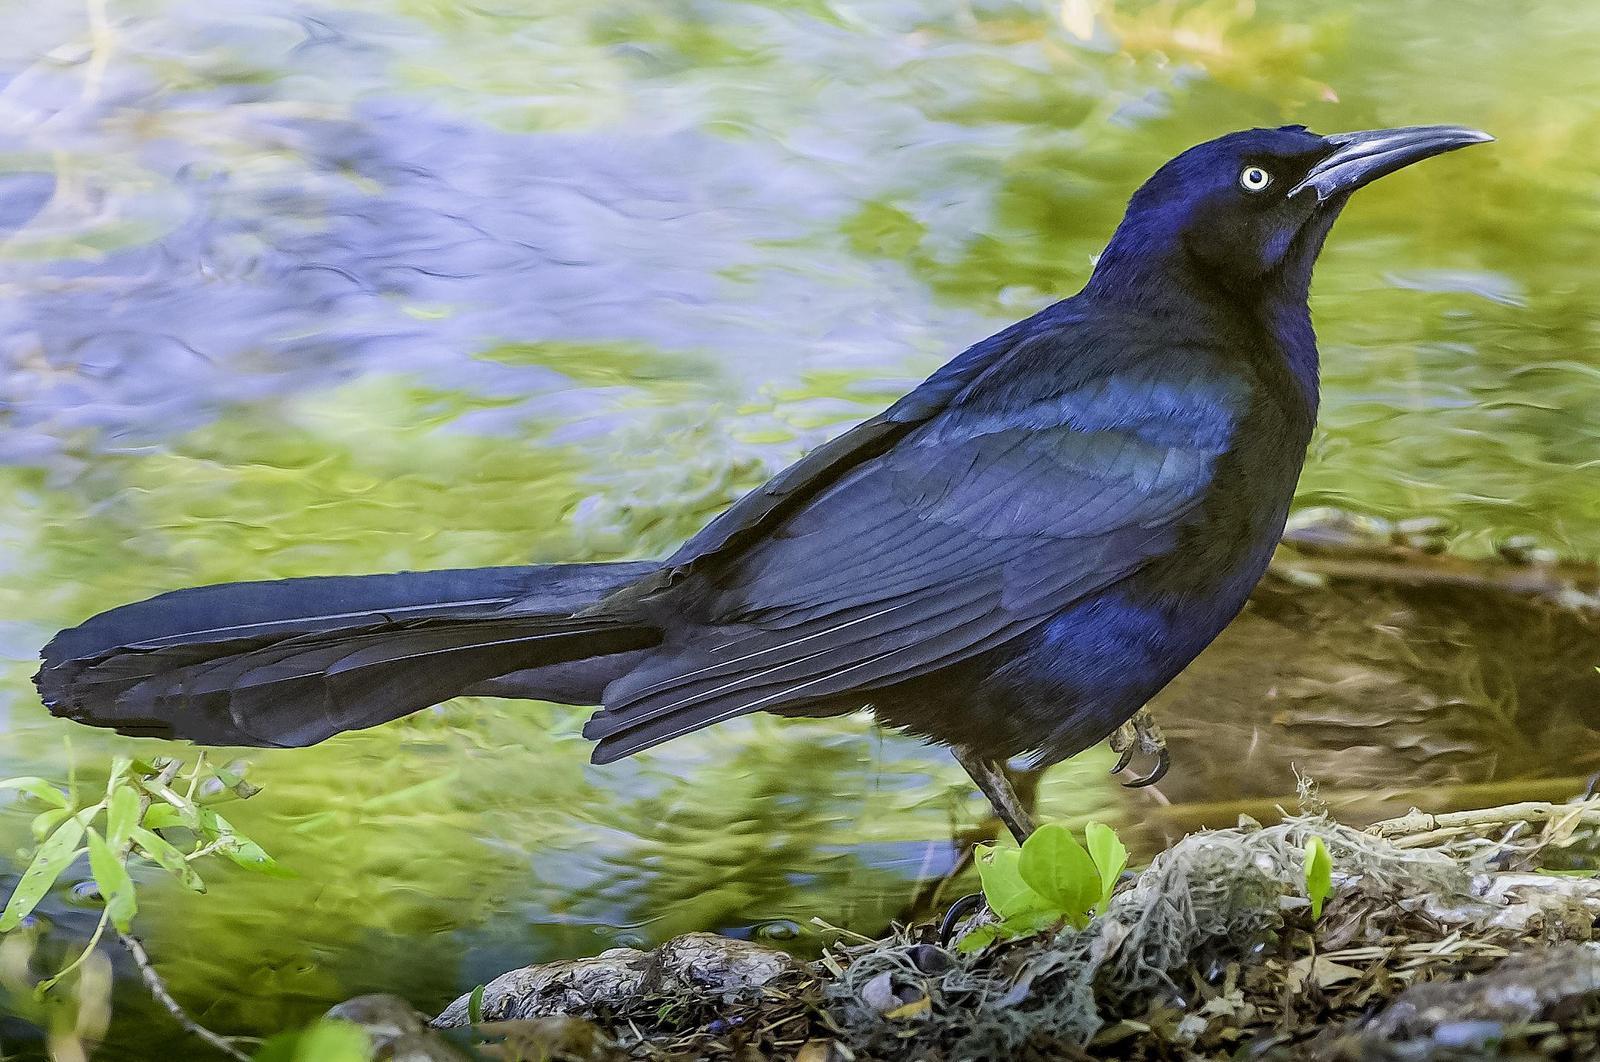 Great-tailed Grackle Photo by Mason Rose